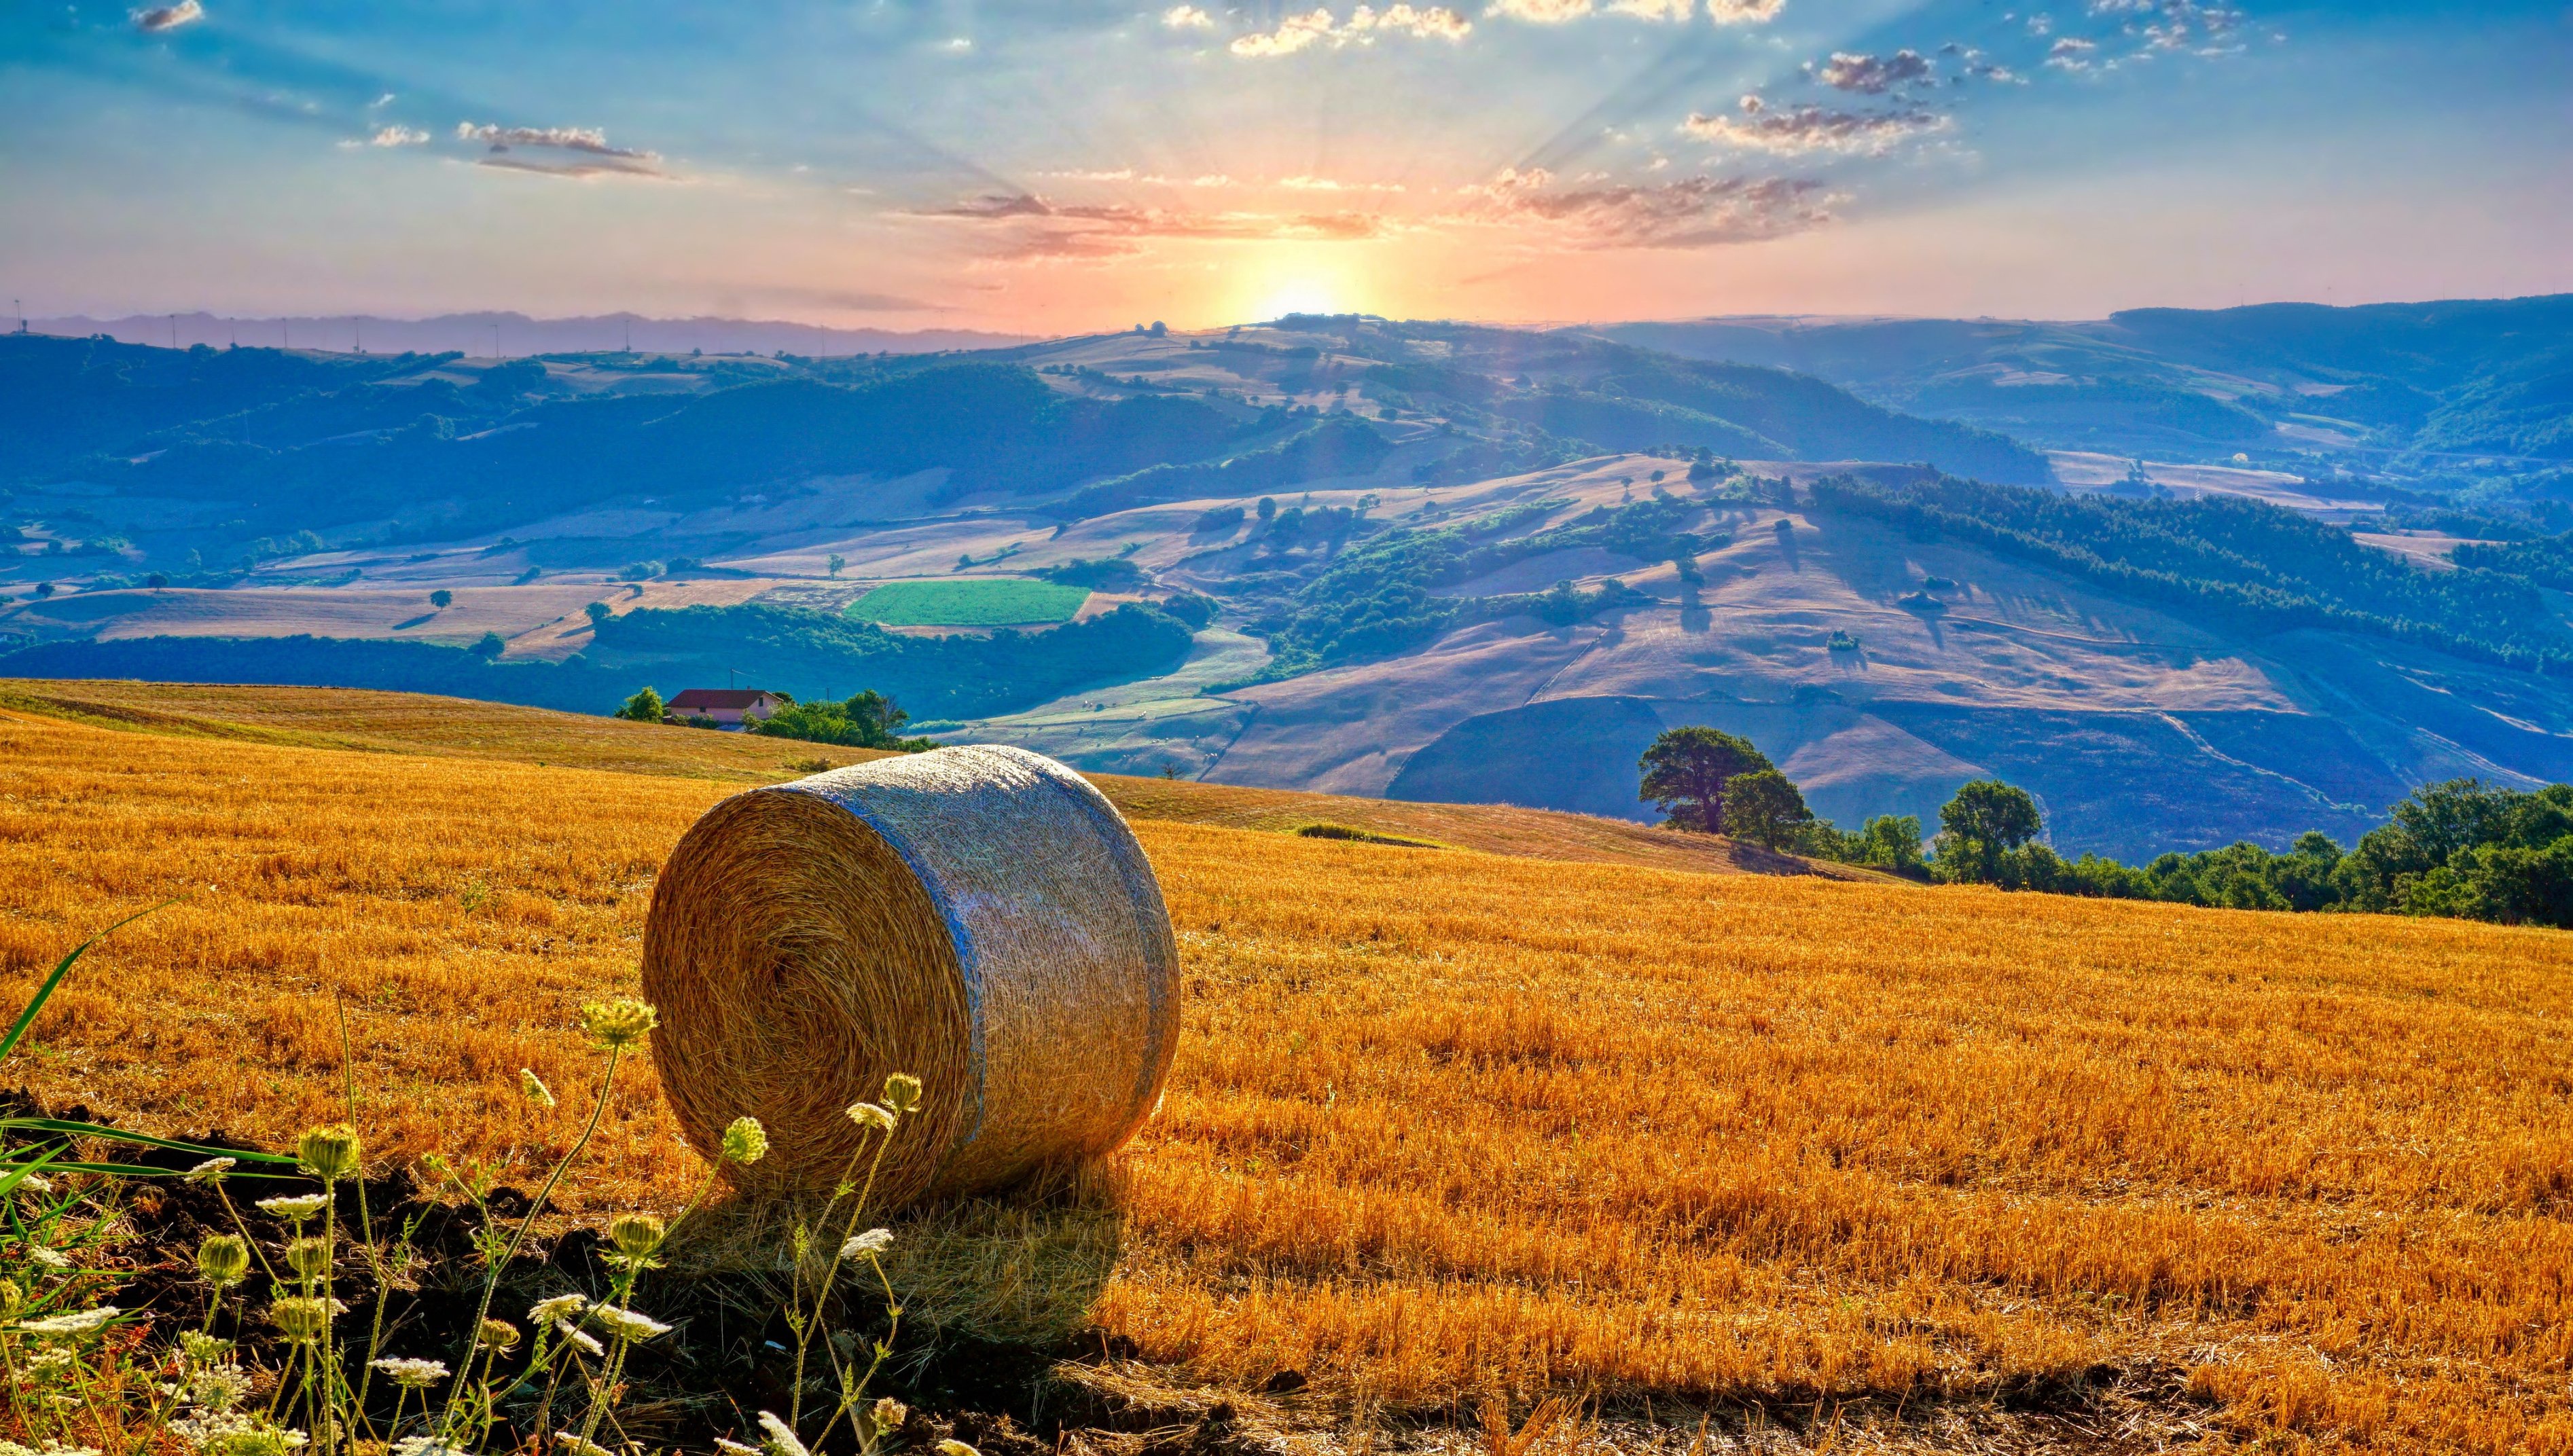 Italy Campania Sunrise Hills Field Hay Hay Bales Sky Clouds Nature Landscape 3788x2144